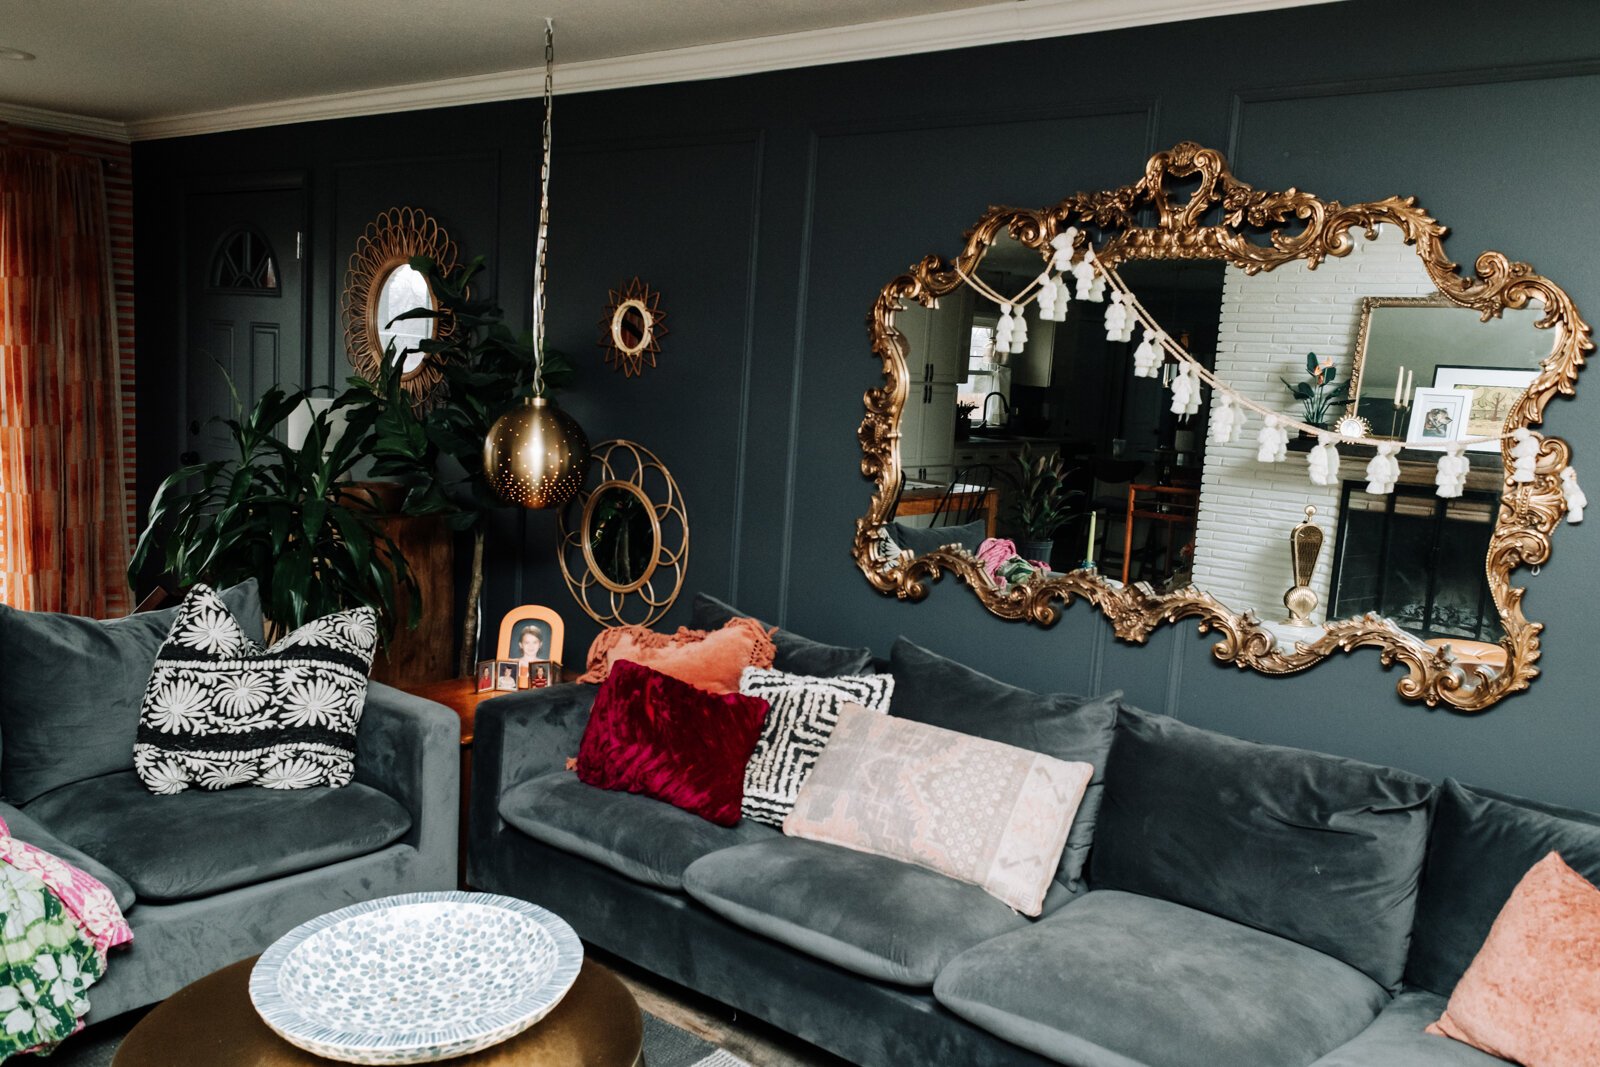 Plants, secondhand pieces, mirrors, texture, and local art define the style aesthetic of Alexa Keefe's living room.